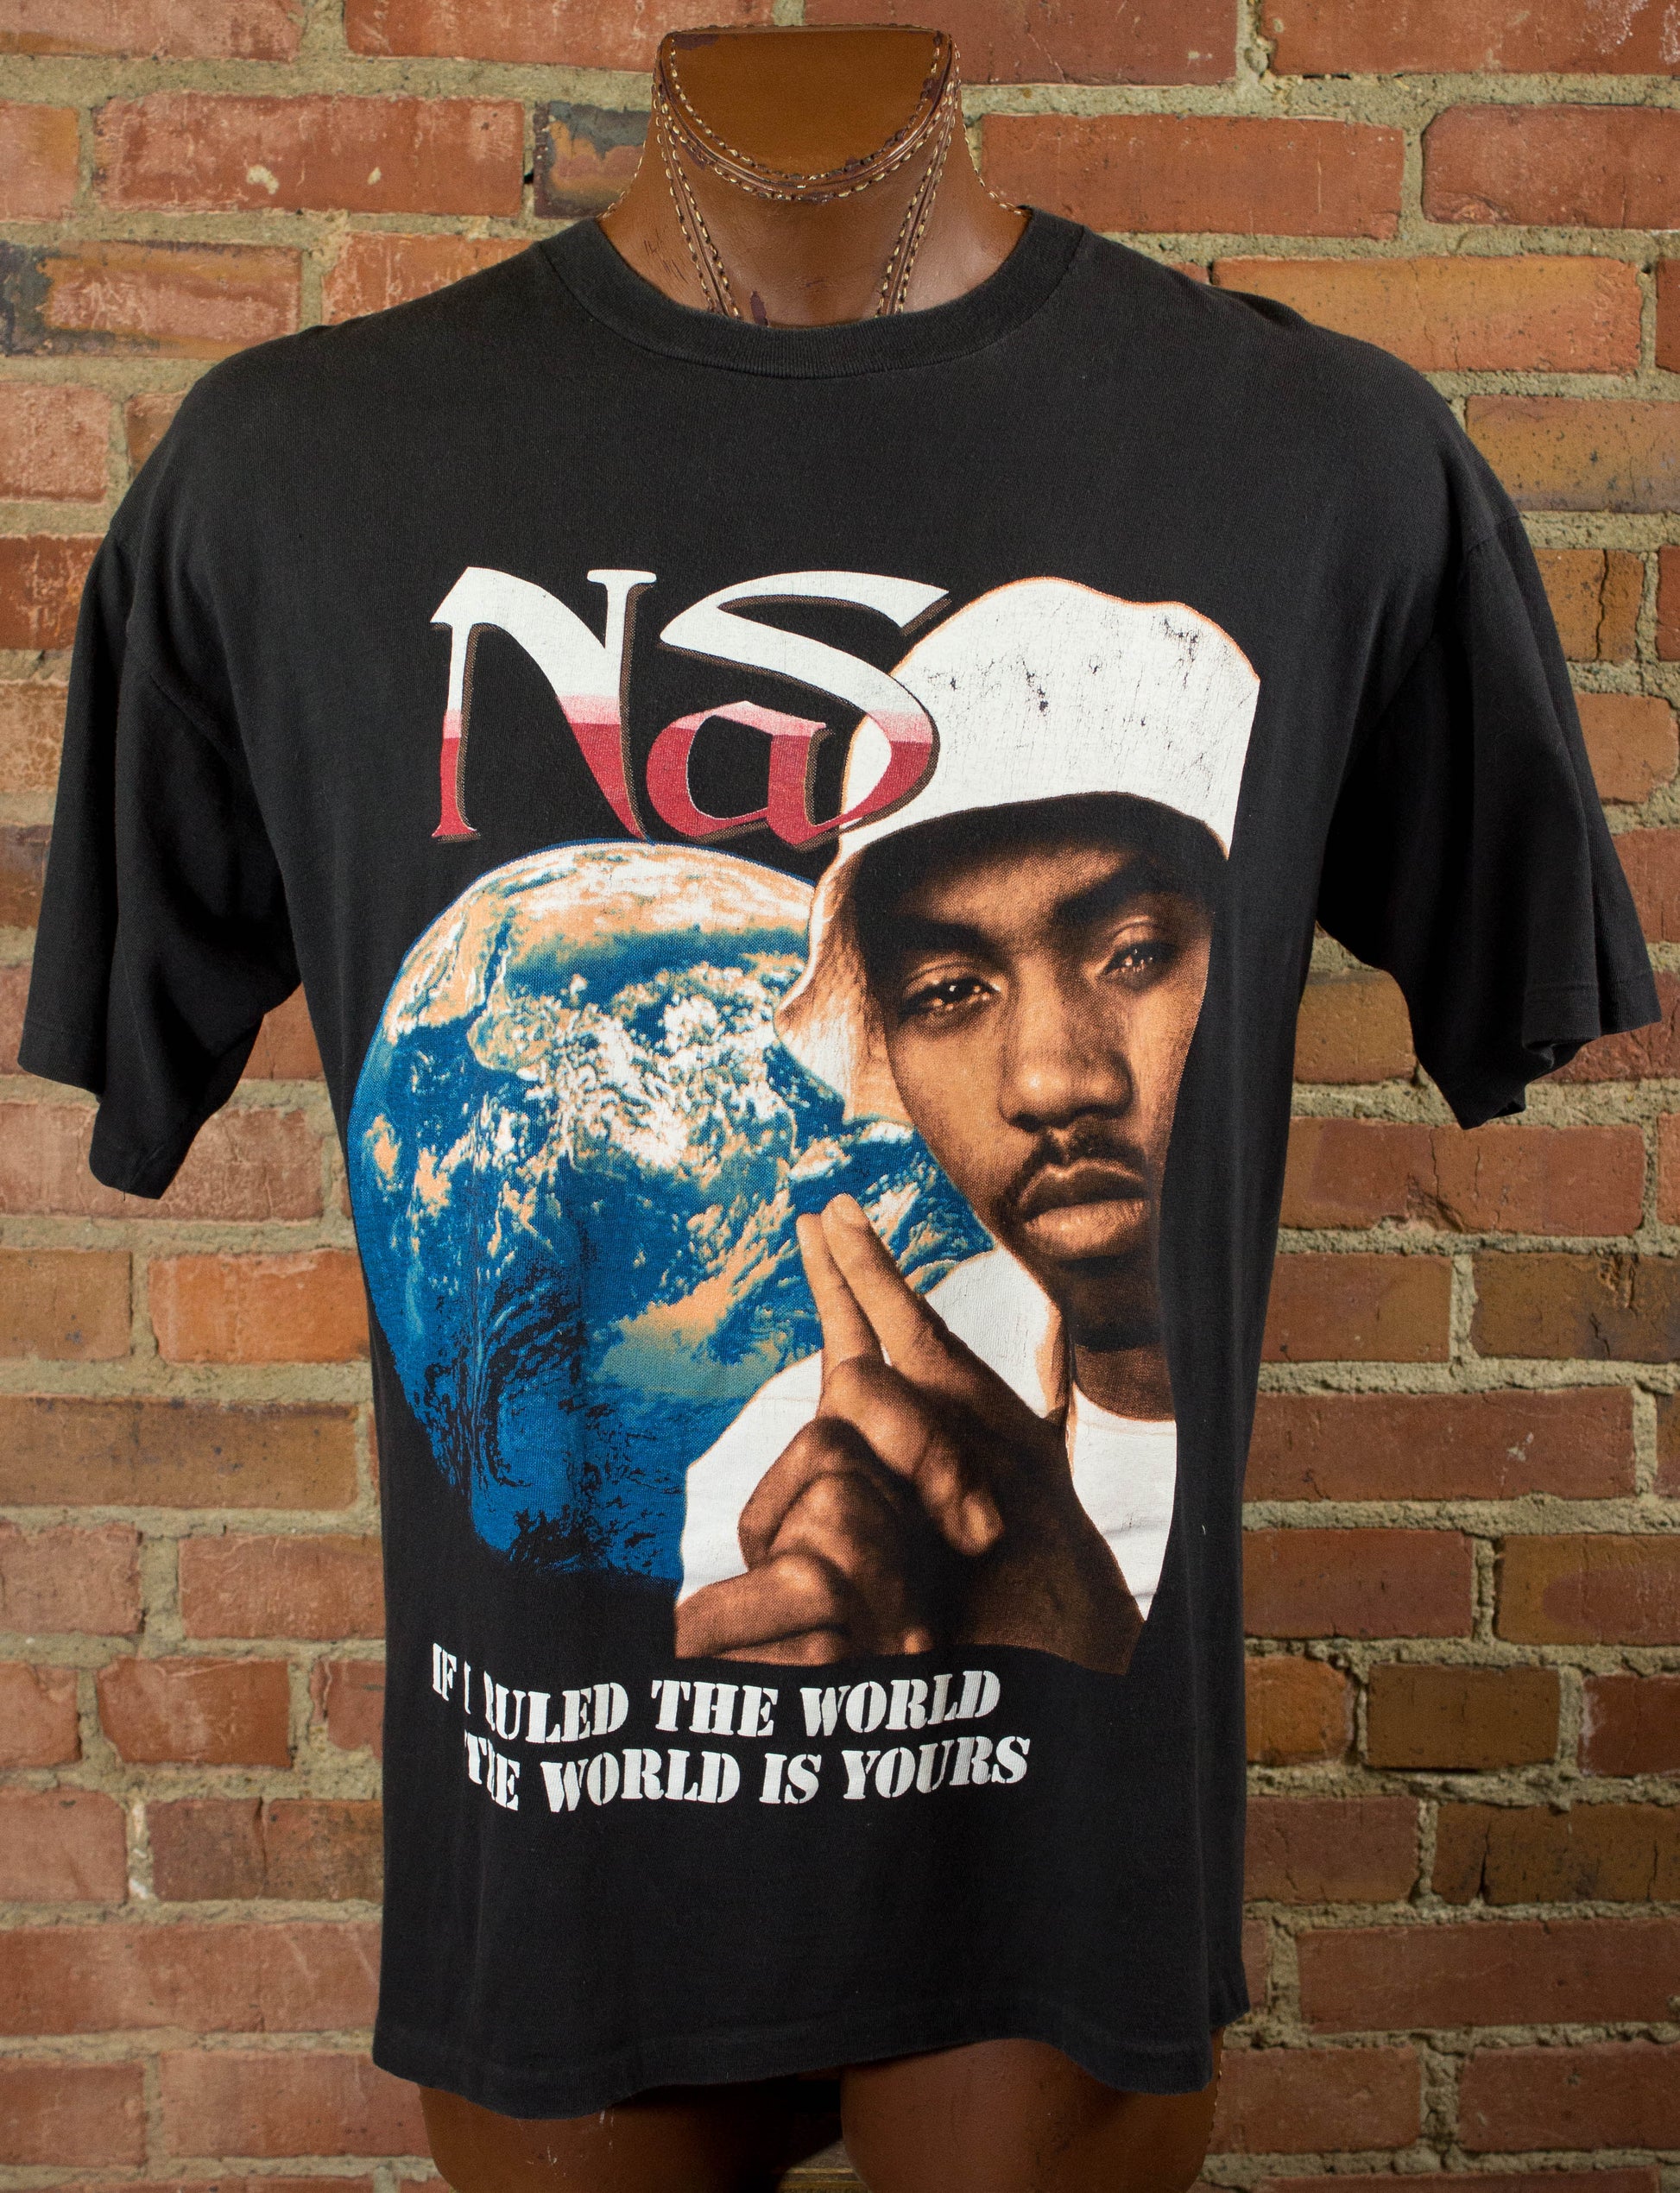 NAS 90s If I Ruled The World The World Is Yours It Was Written Black Bootleg Rap Tee Concert T Shirt Unisex XL